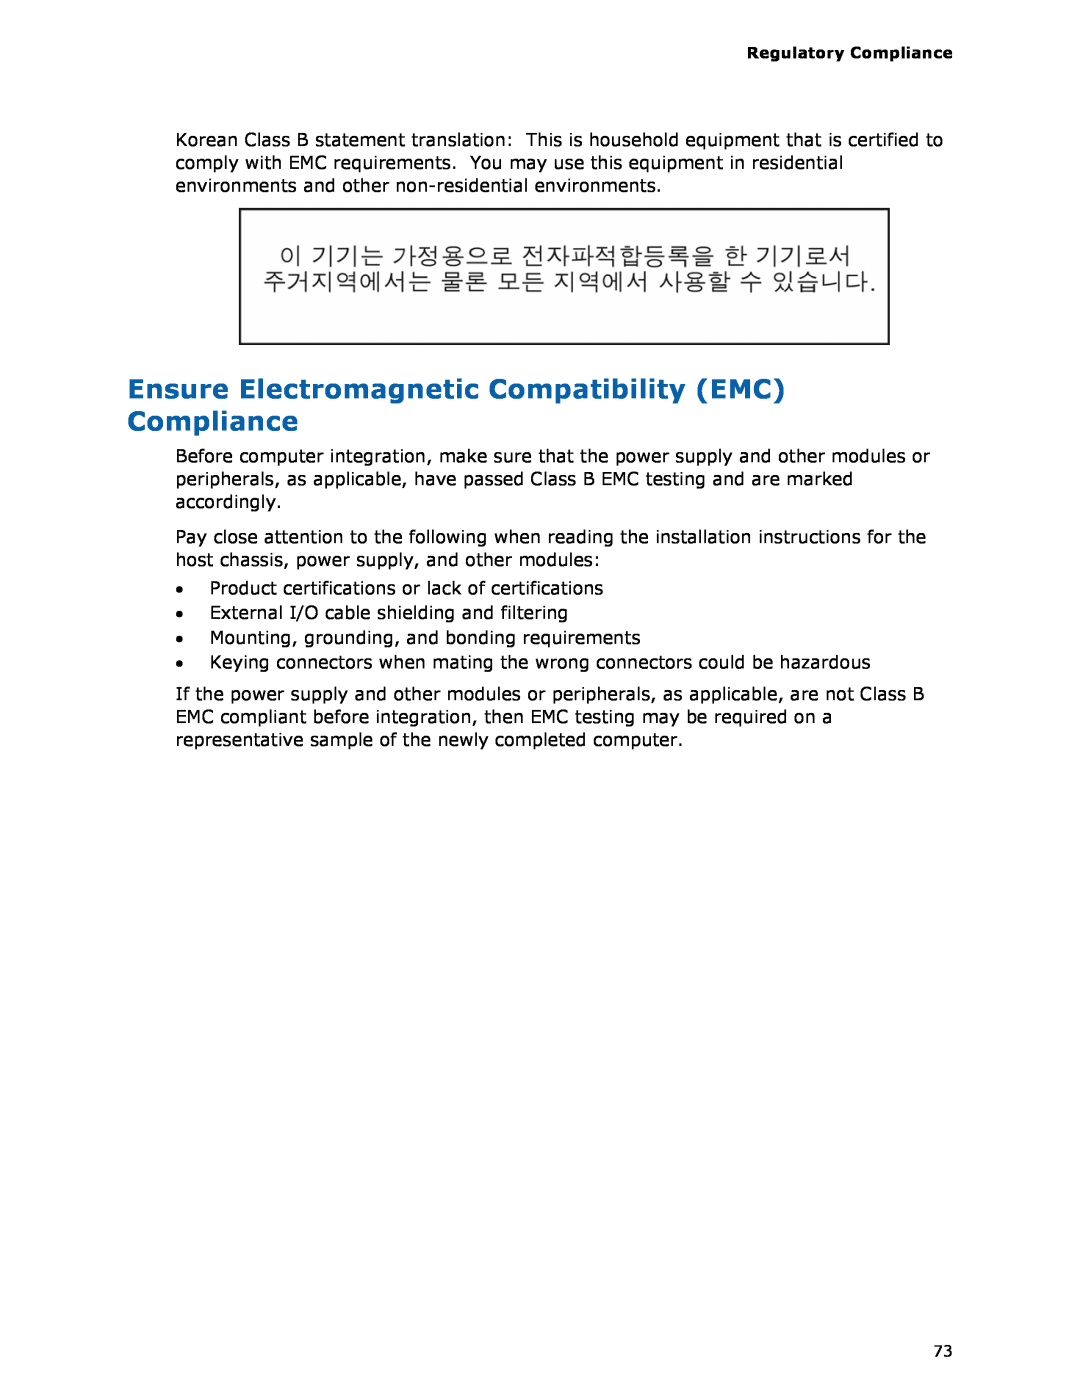 Intel DG33FB manual •Product certifications or lack of certifications 